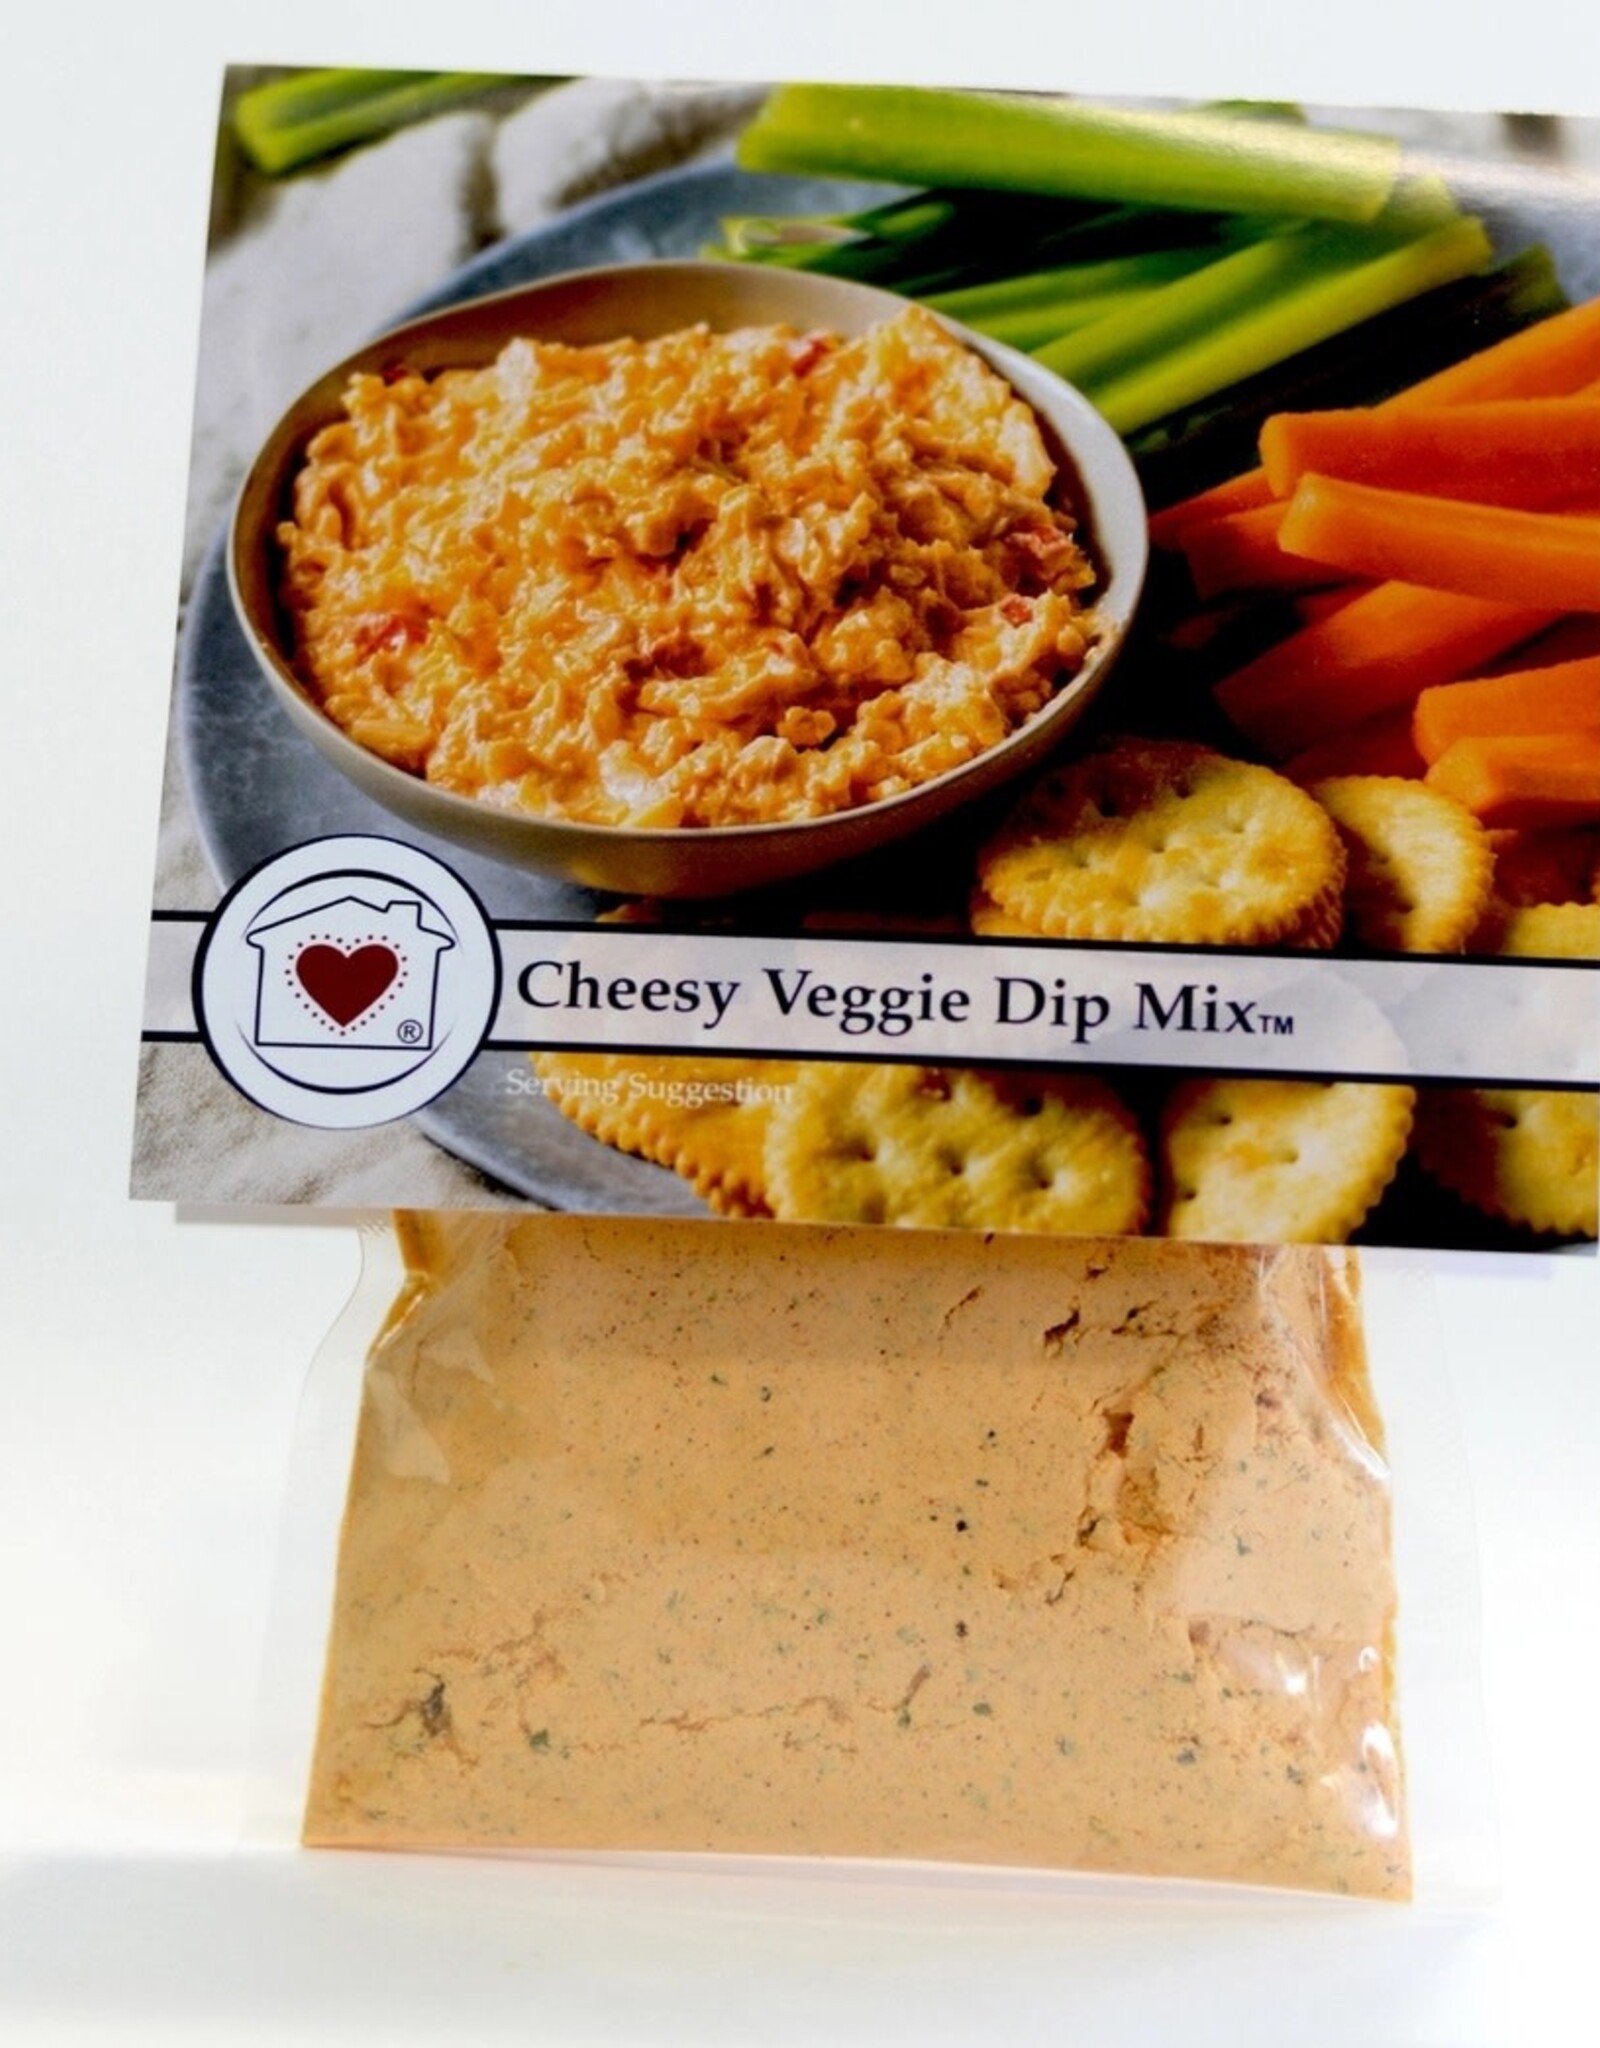 Country Home Creations CHEESY VEGGIE DIP MIX - makes 2 batches